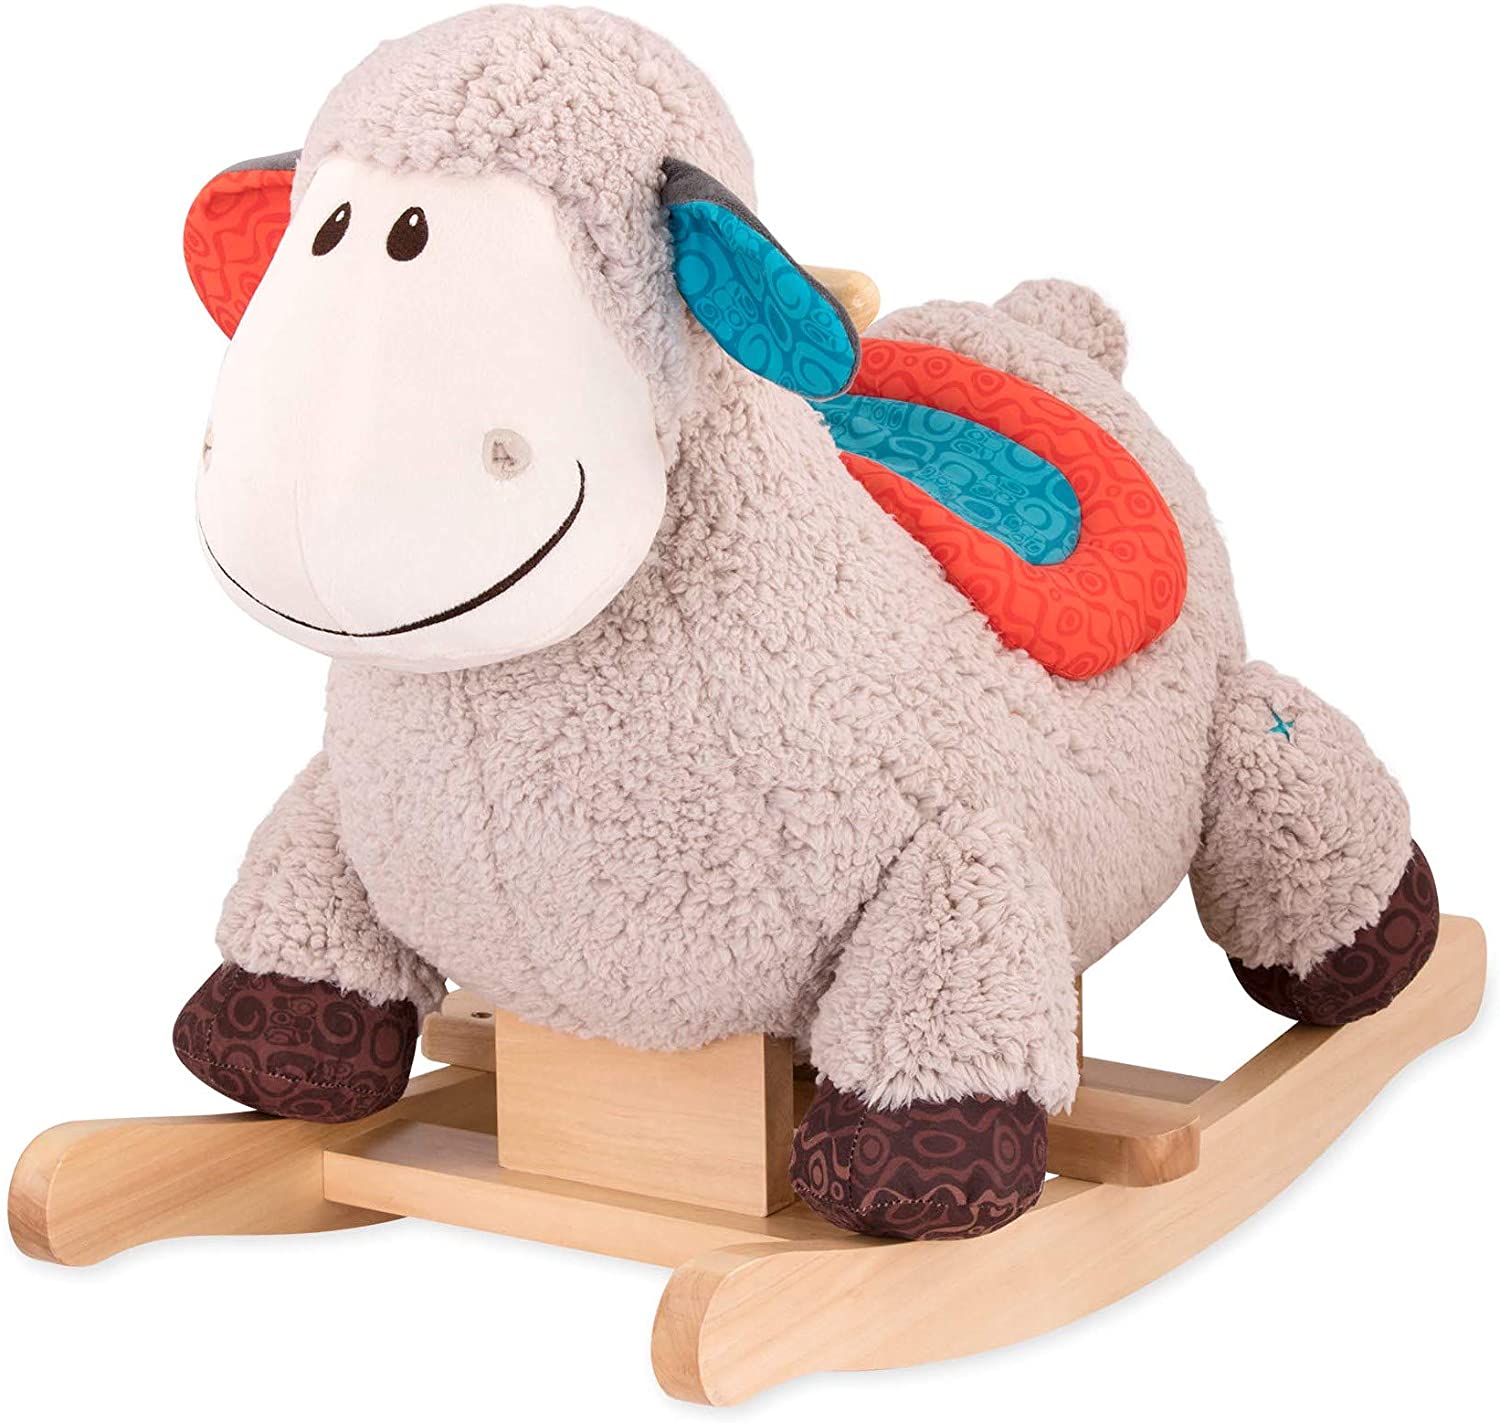 B. toys by Battat - Rodeo Rocking Horse, Sheep